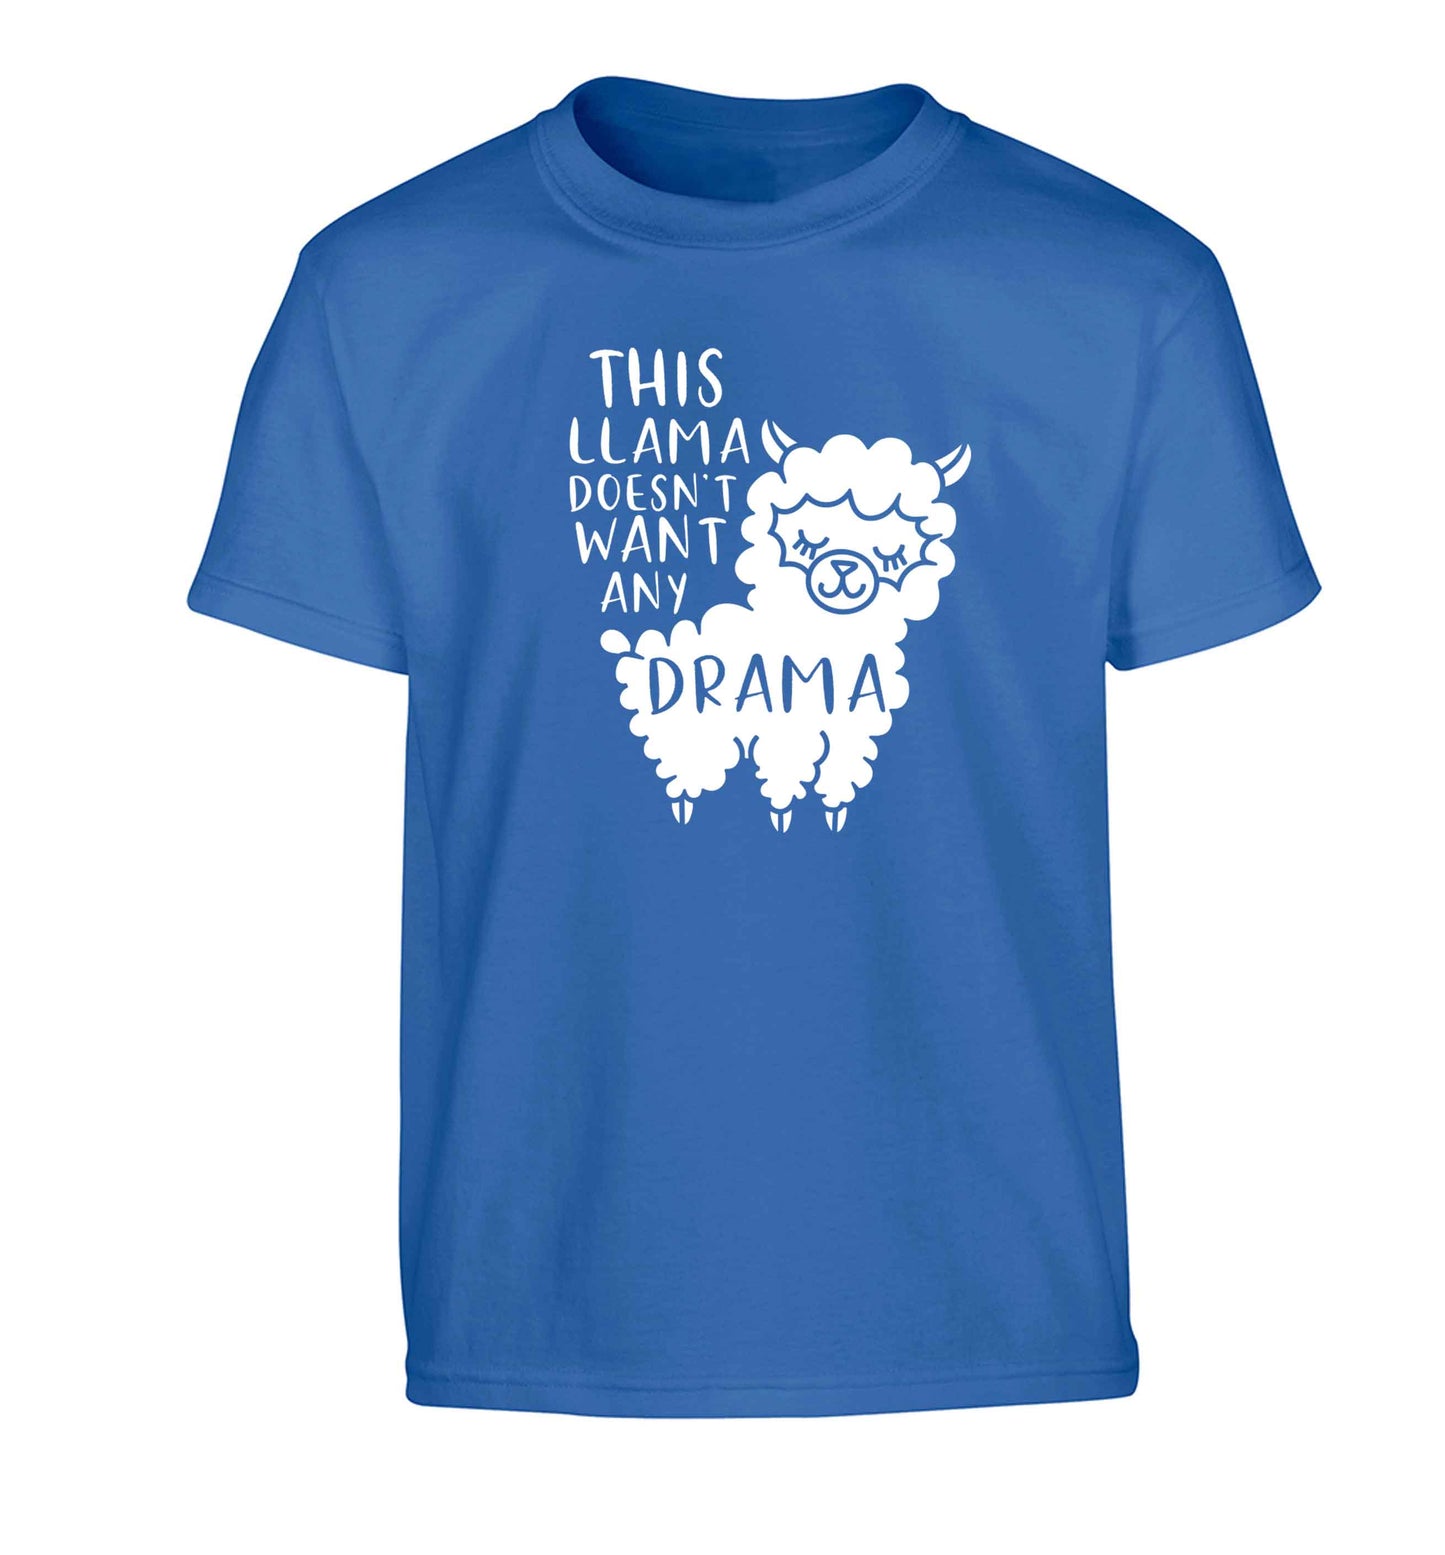 This Llama doesn't want any drama Children's blue Tshirt 12-13 Years